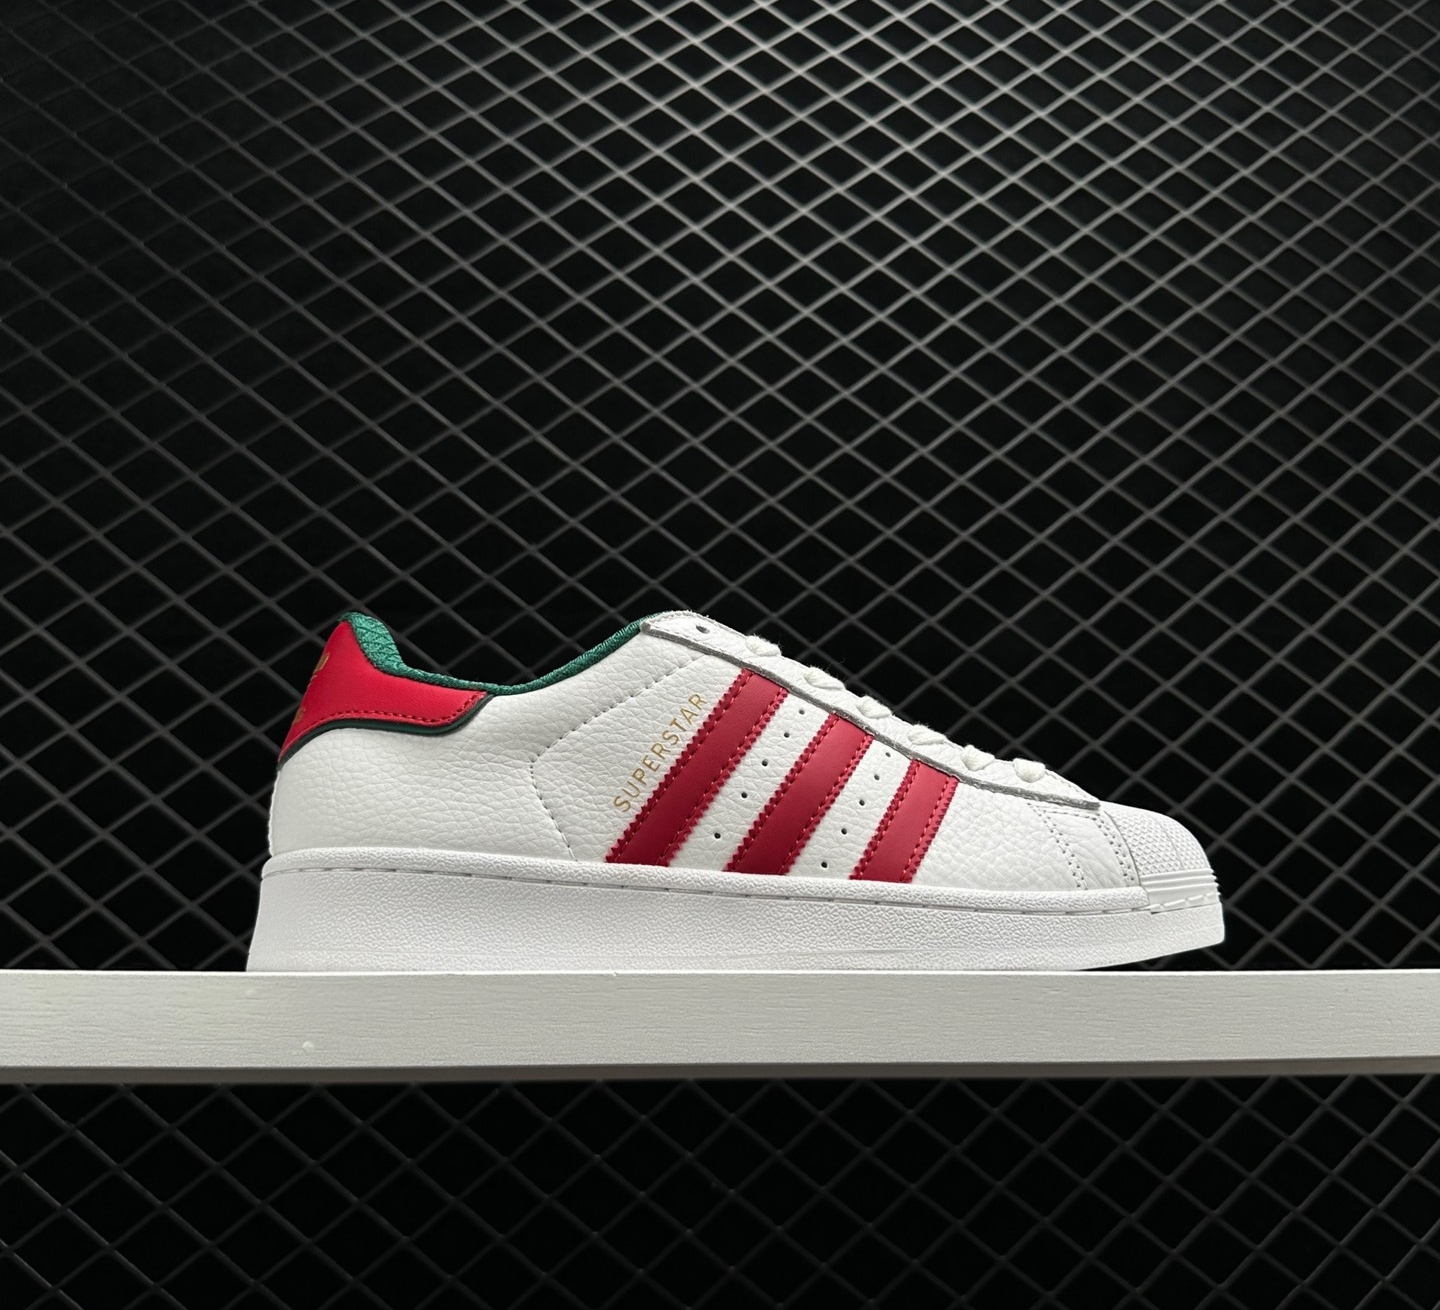 Adidas Superstar White Green Red D96974 - Classic Style with a Colorful Twist